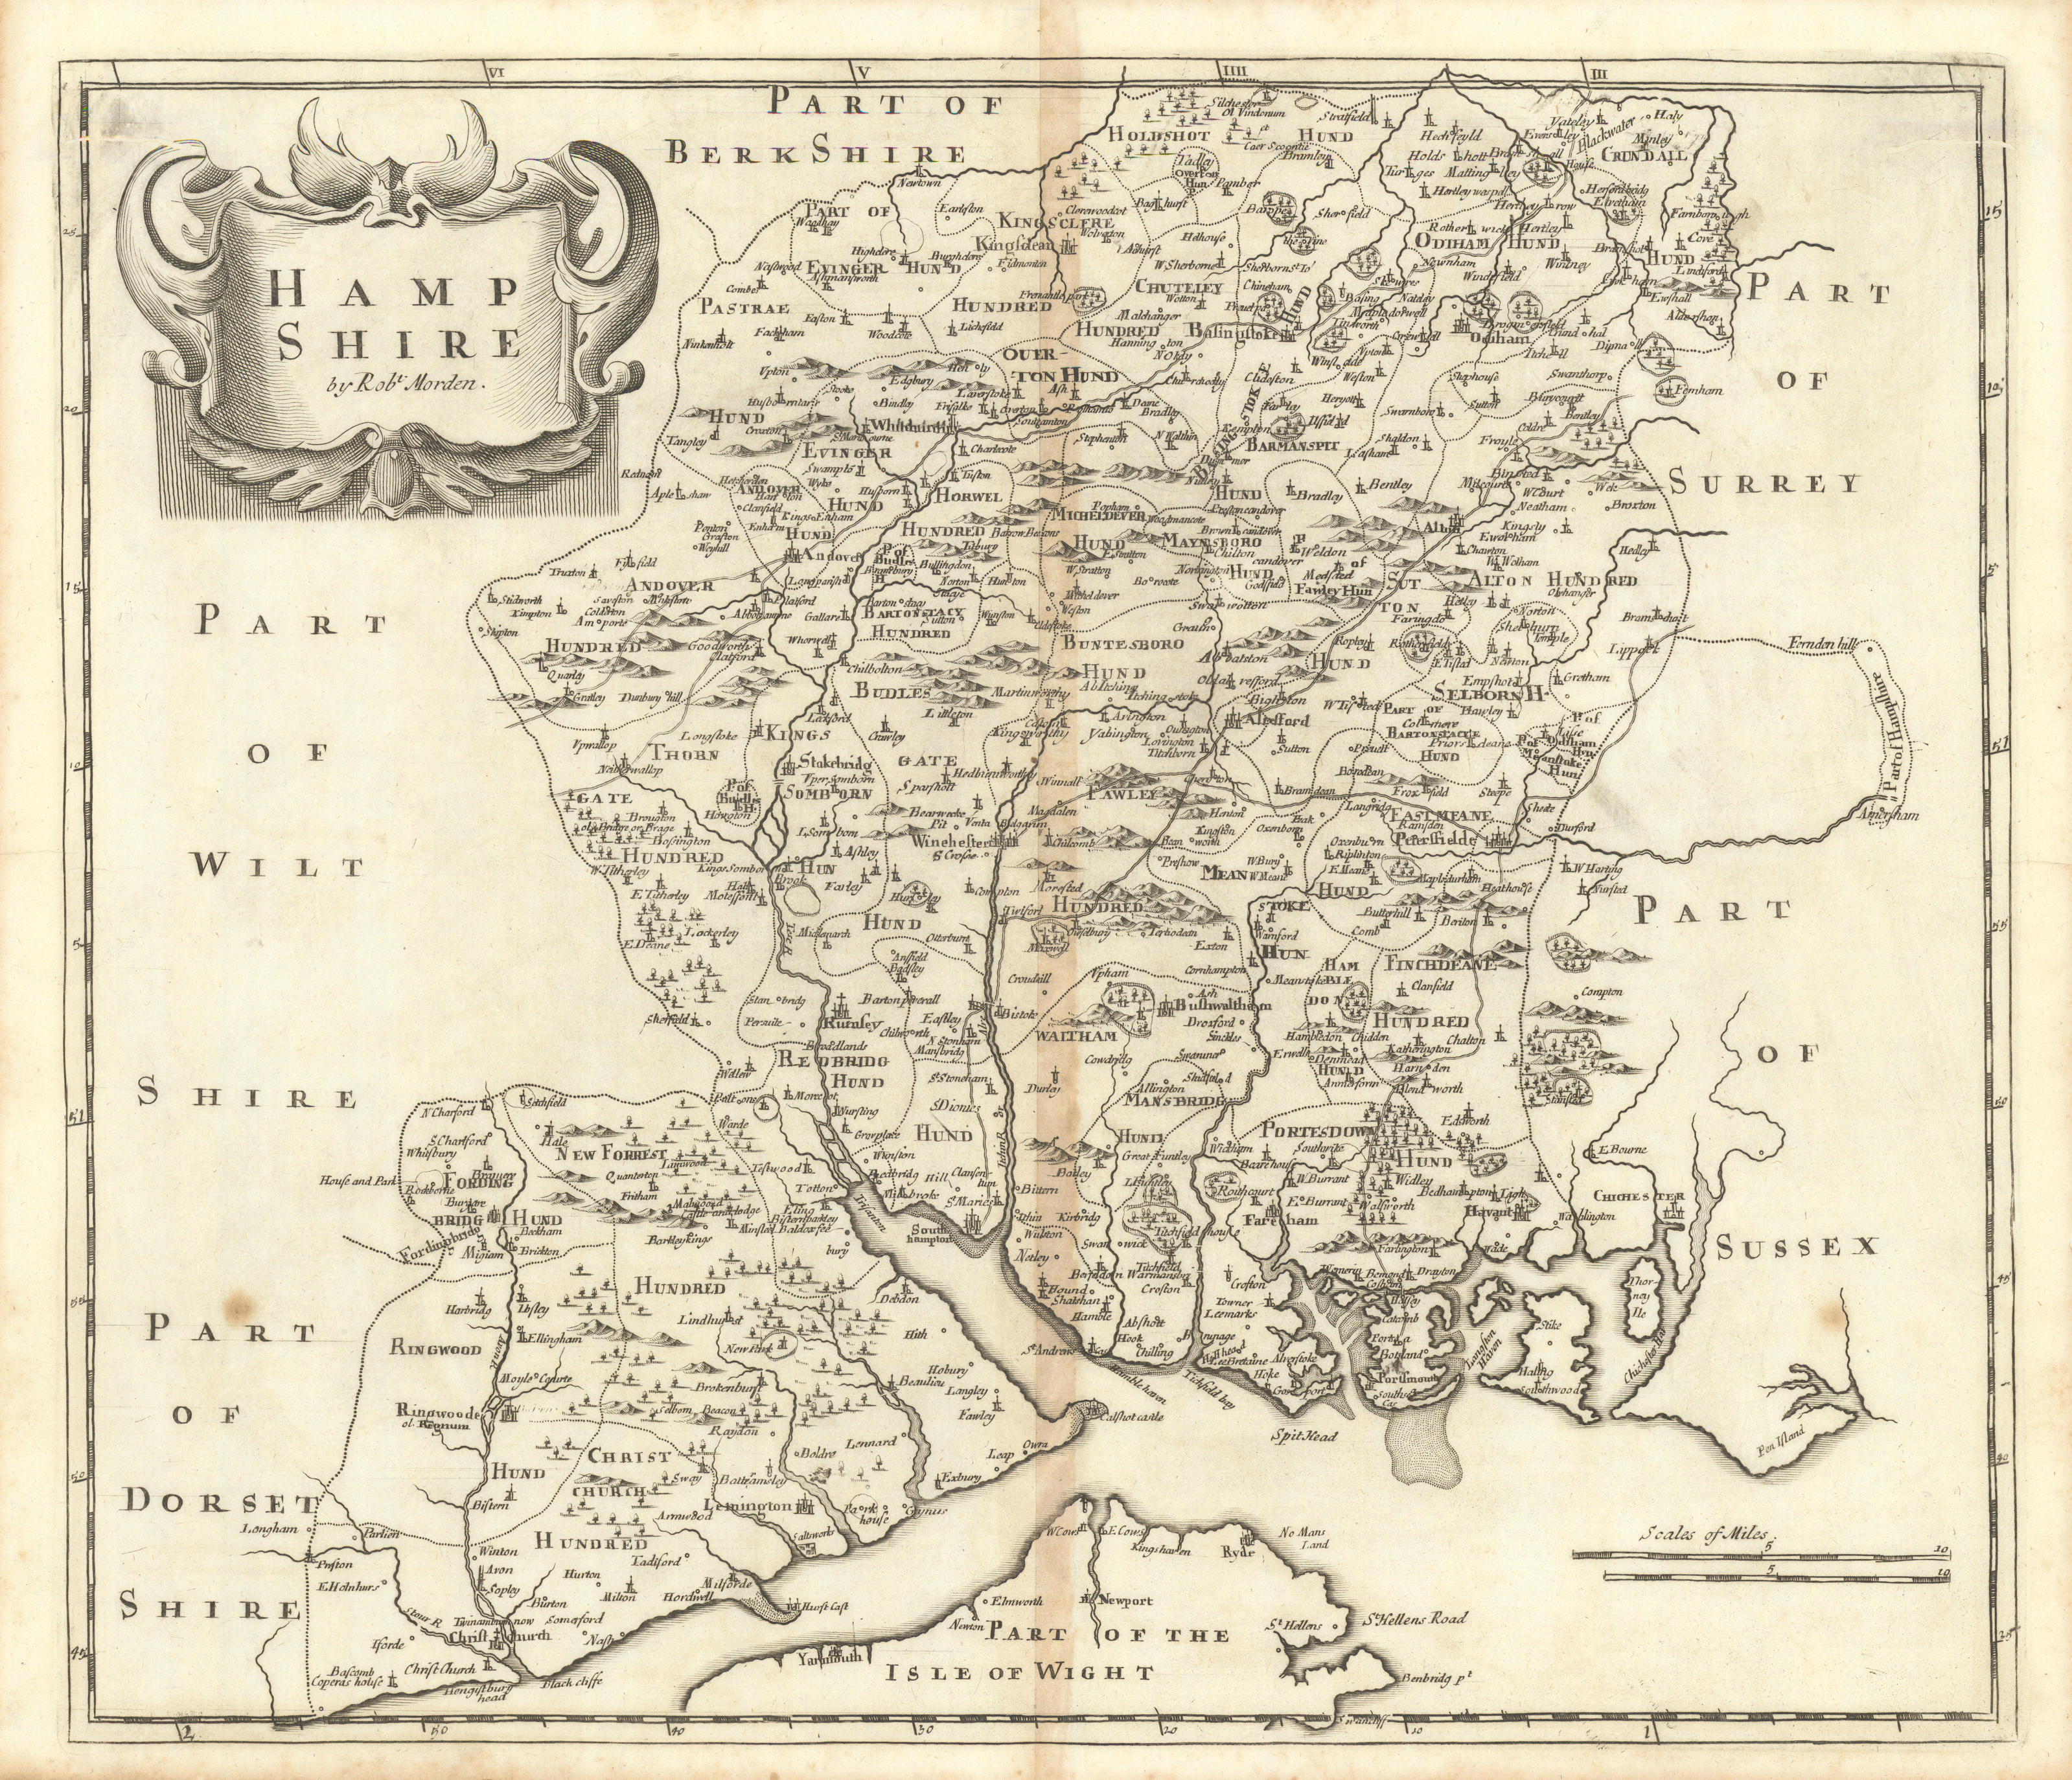 Associate Product Hampshire. 'HAMP SHIRE' by ROBERT MORDEN from Camden's Britannia 1695 old map